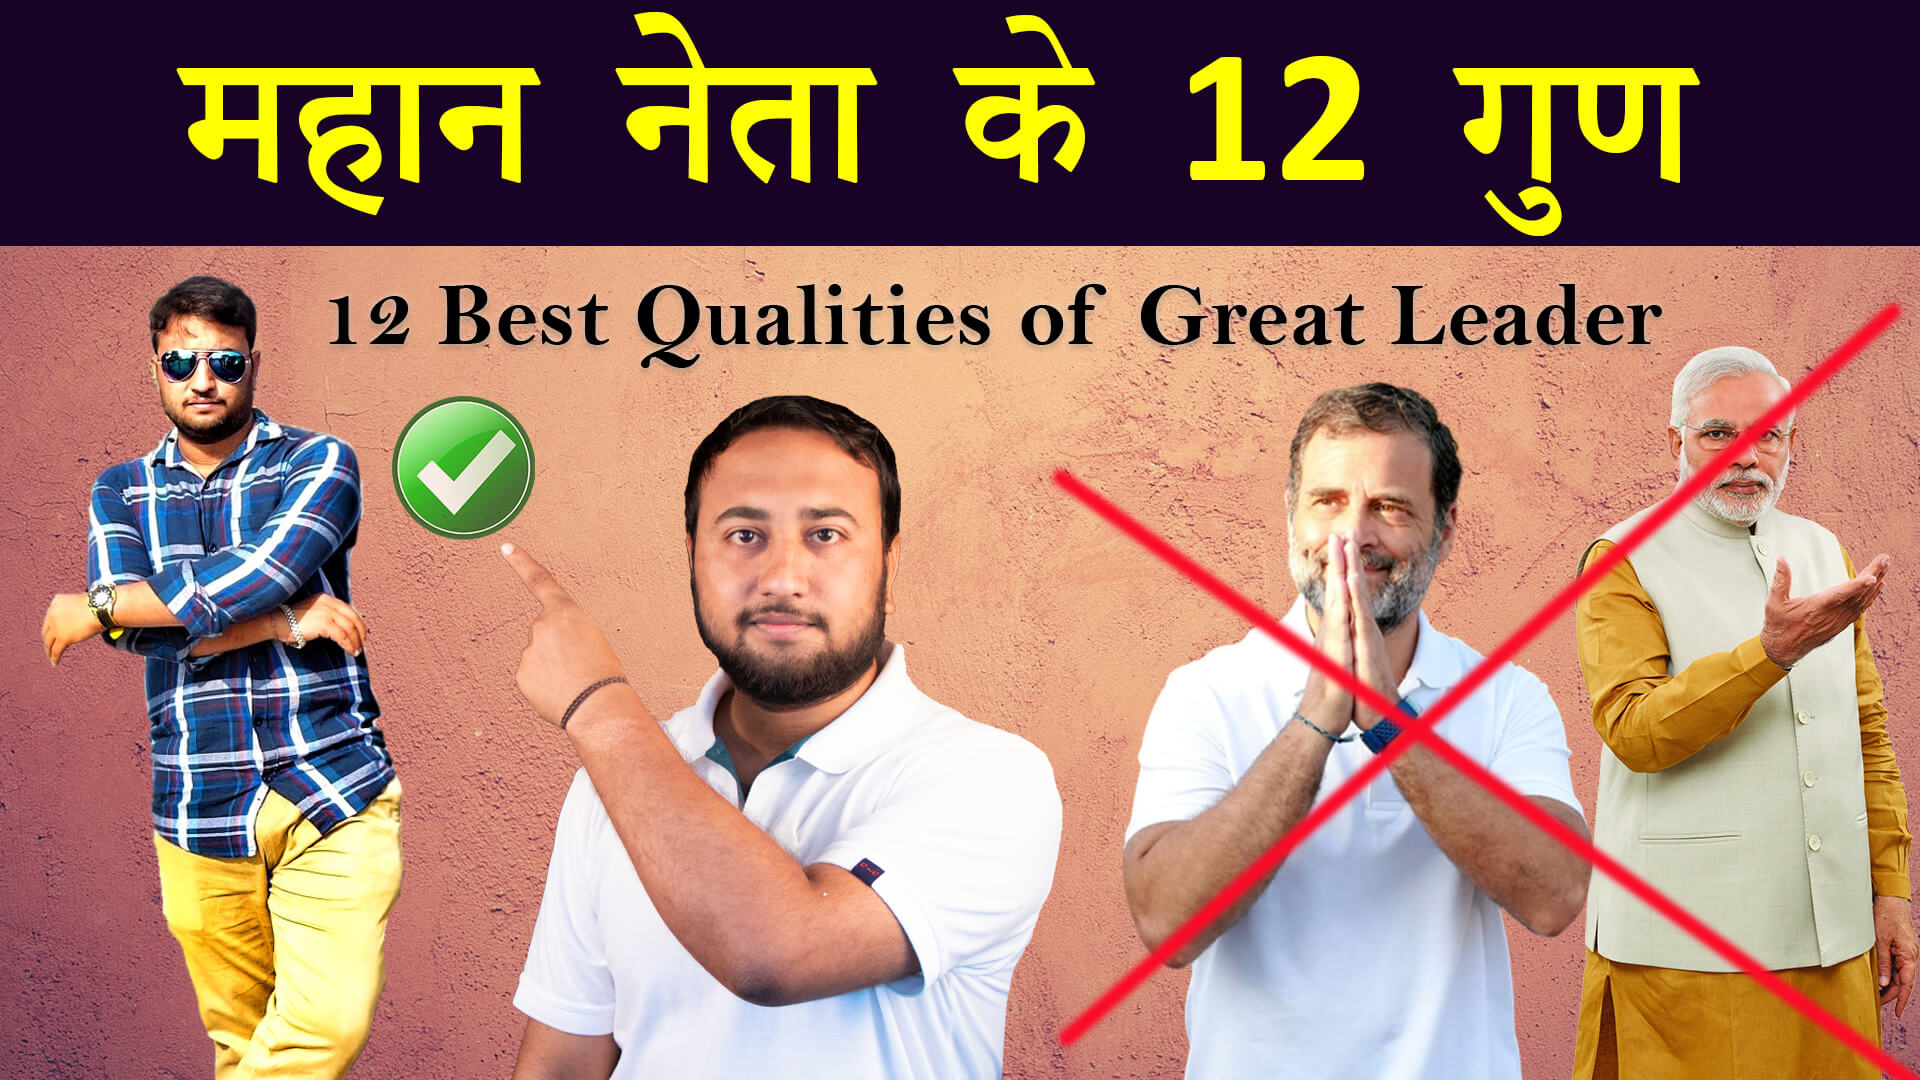 You are currently viewing 12 Qualities of a Great Leader in Hindi – महान नेता के 12 गुण